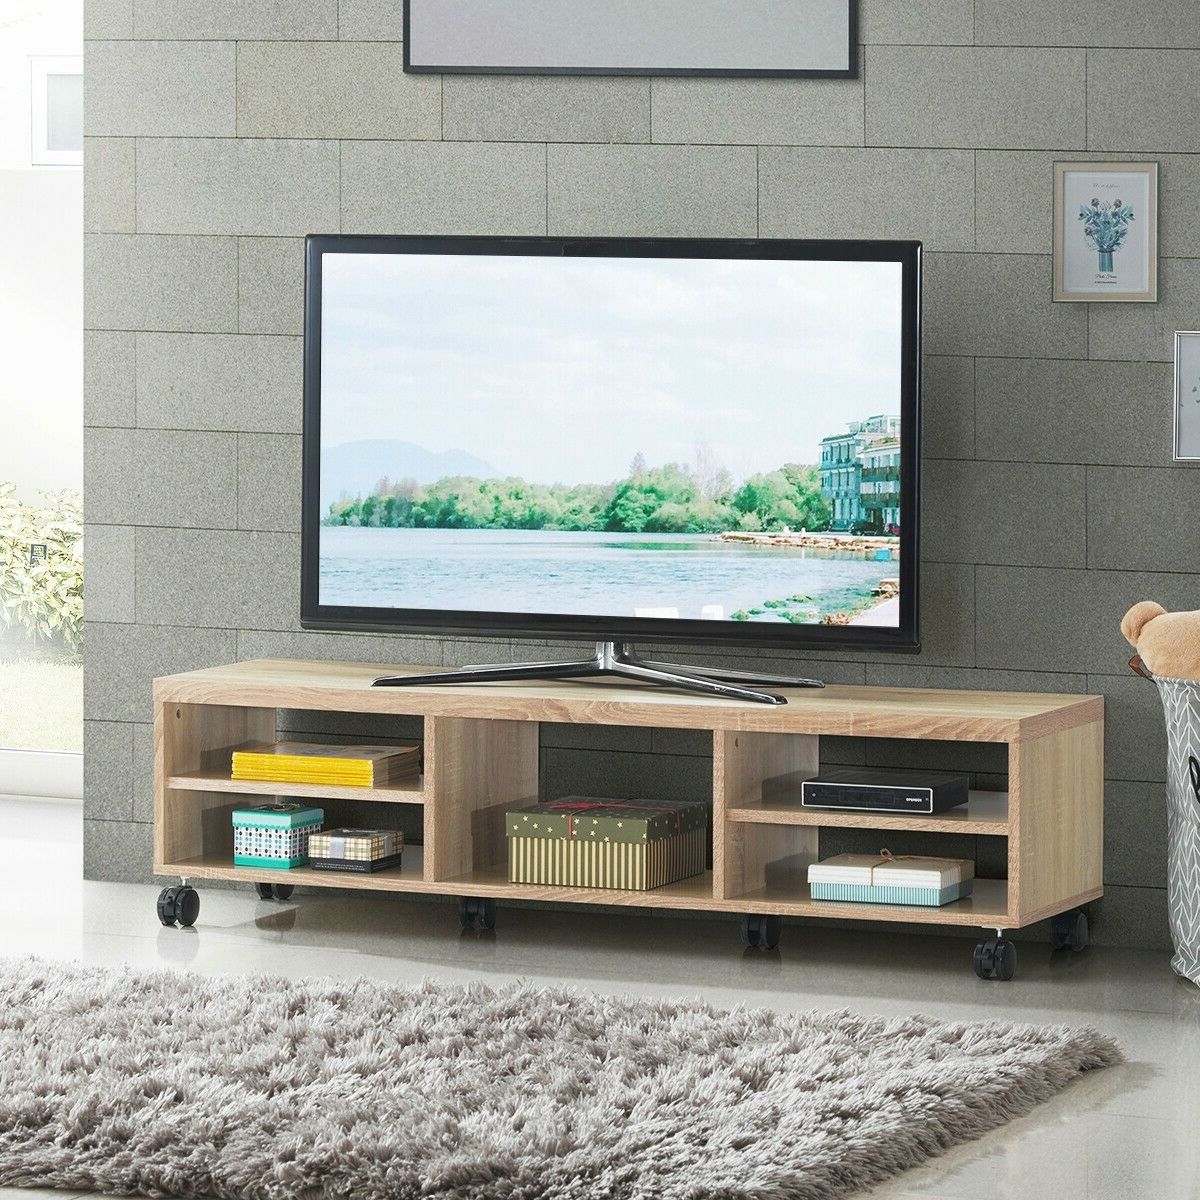 Rolling 60 Inch Tv Stand In Natural Wood Finish With 6 Wheel Regarding Modern Rolling Tv Stands (Gallery 18 of 20)